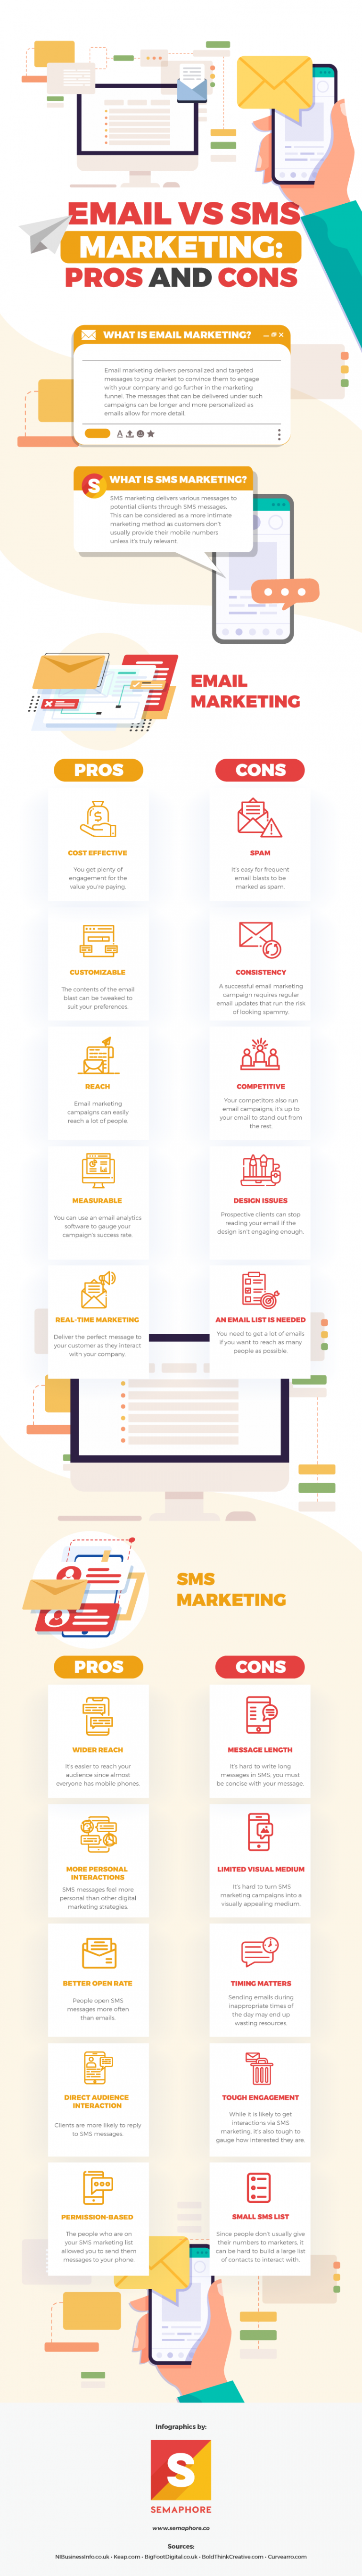 Email-vs-SMS-Marketing-Pros-and-Cons-Infographic